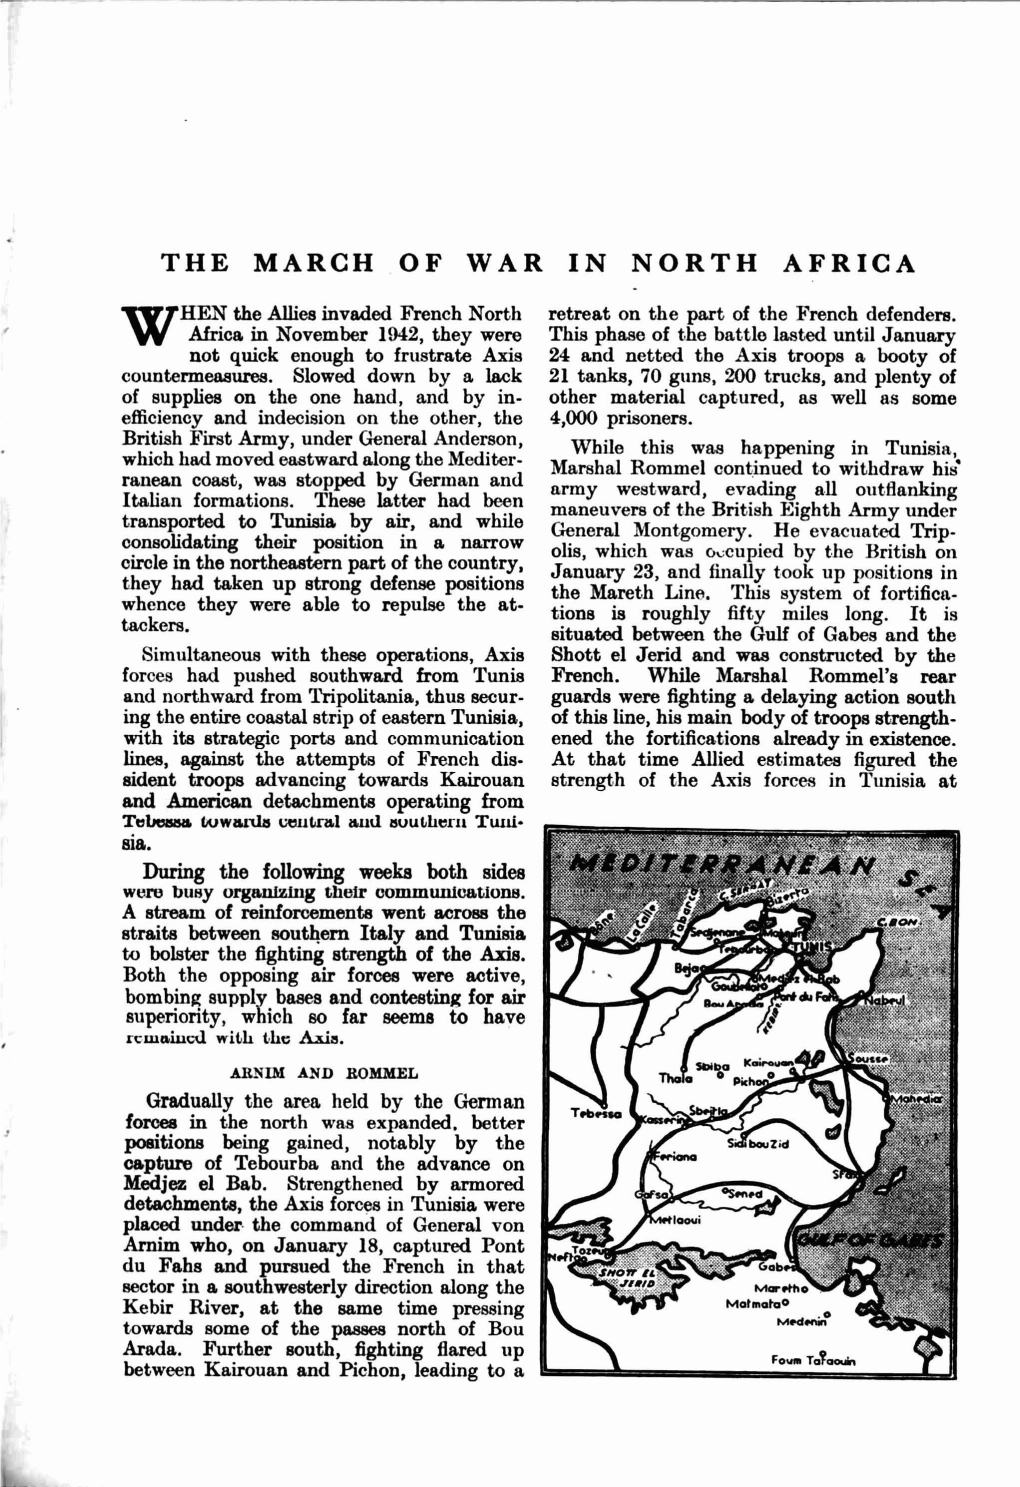 The March of War in North Africa